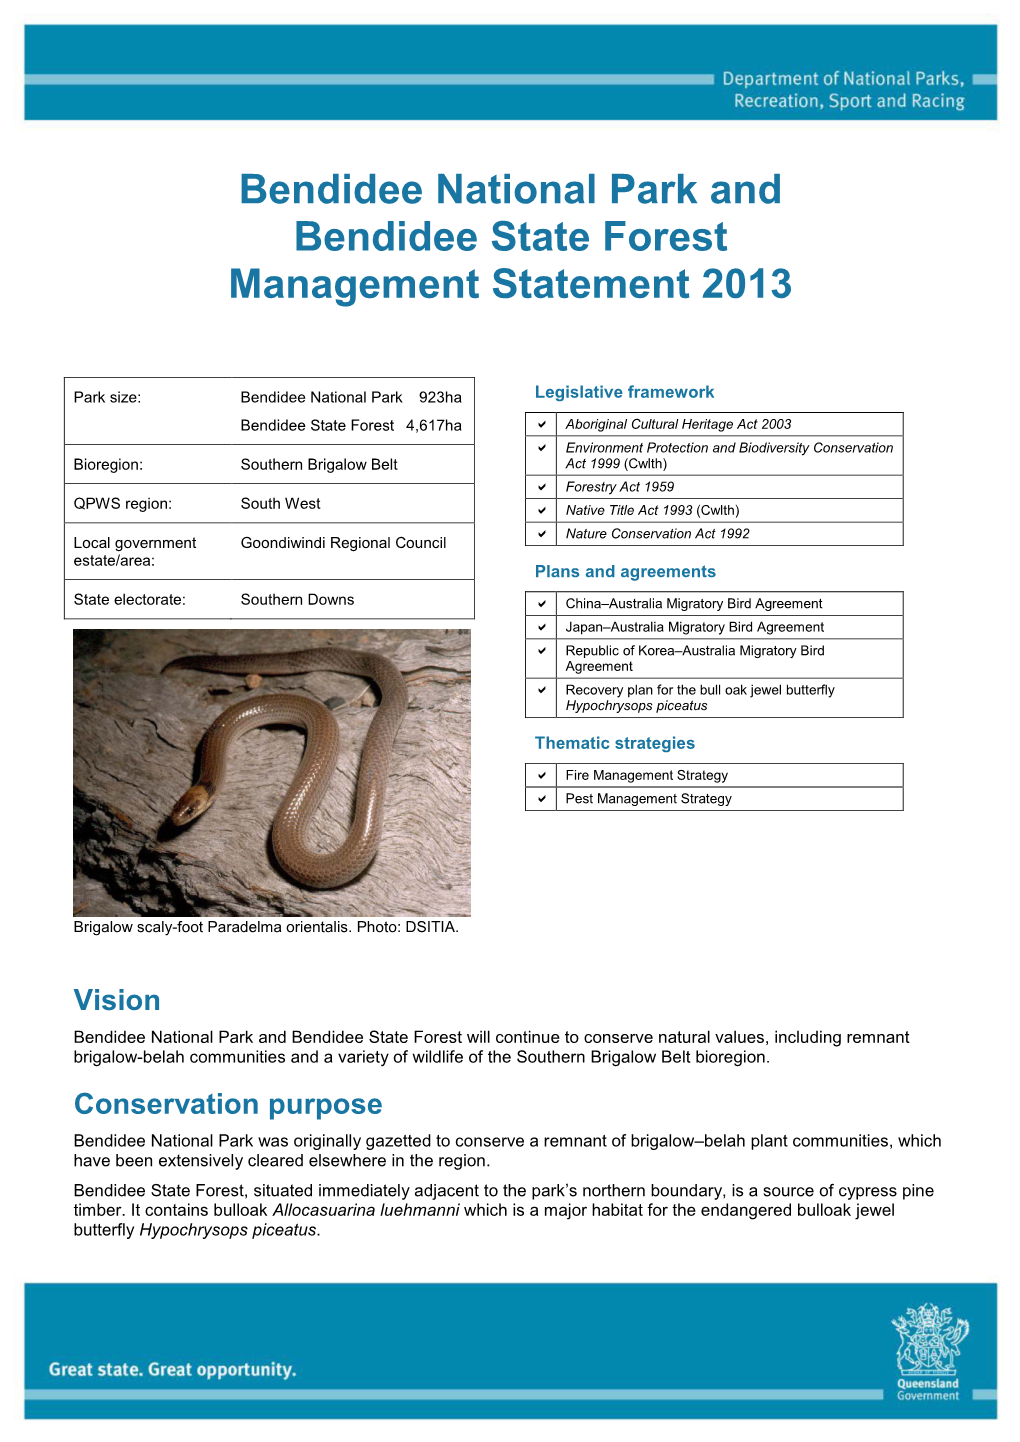 Bendidee National Park and Bendidee State Forest Management Statement 2013